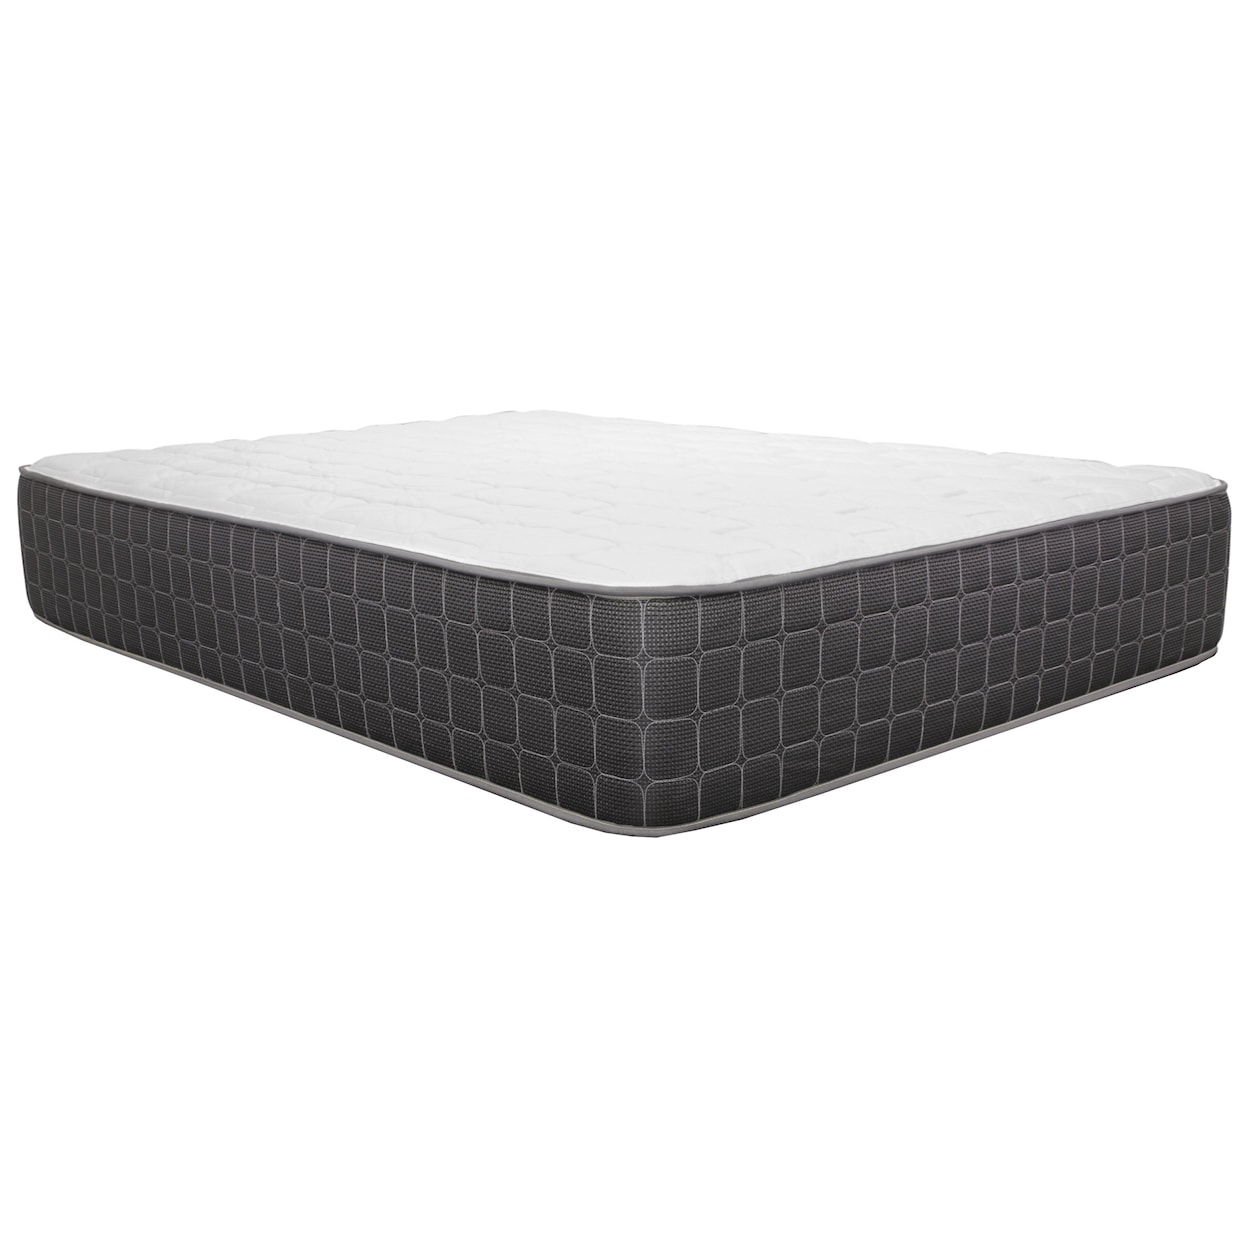 Corsicana 1700 Kingsmere Full 13.5" Firm Pocketed Coil Mattress